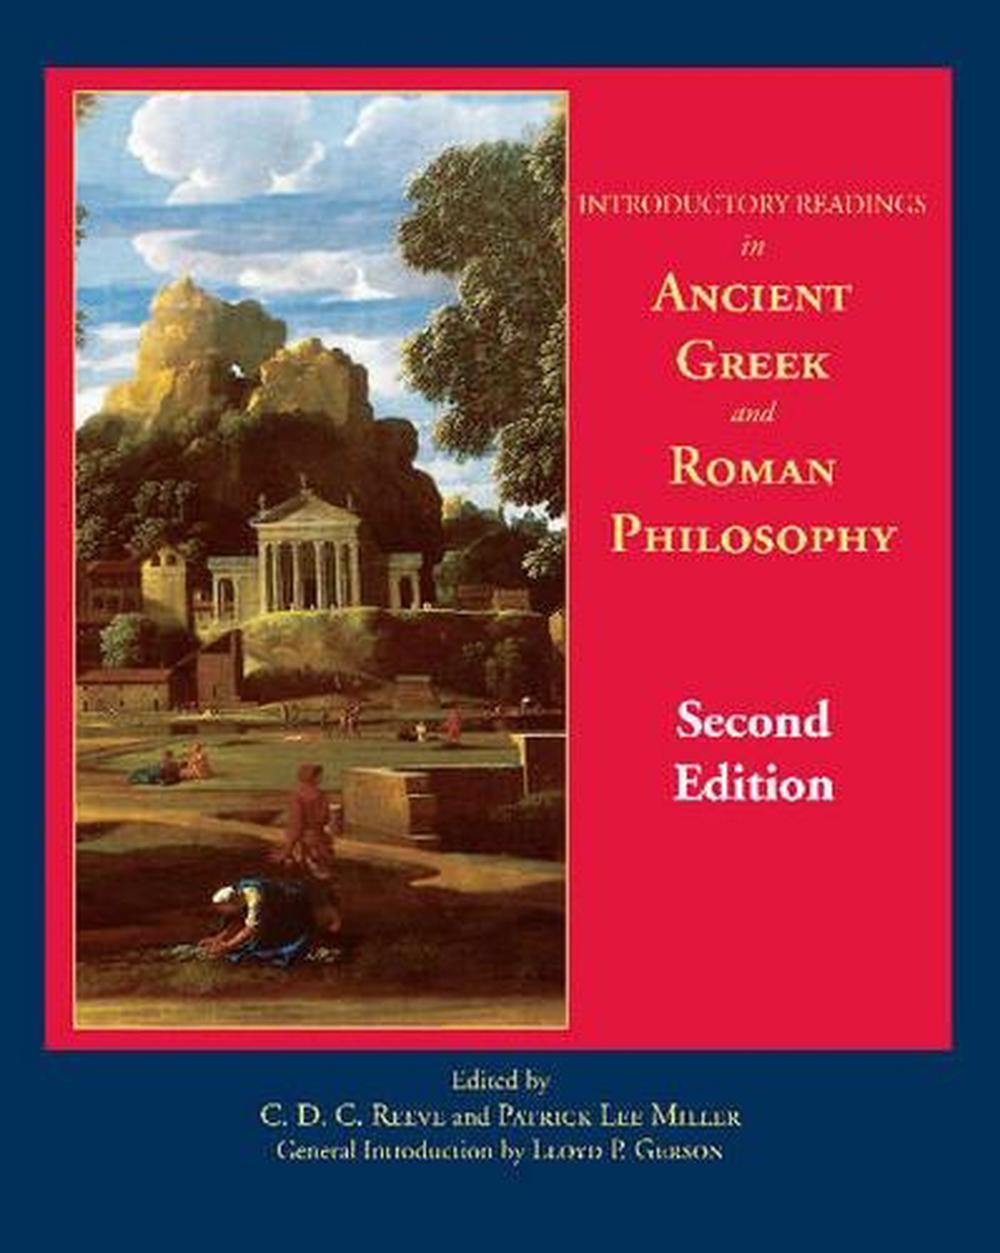 Introductory Readings in Ancient Greek and Roman Philosophy by Lloyd P ... - 9781624663529